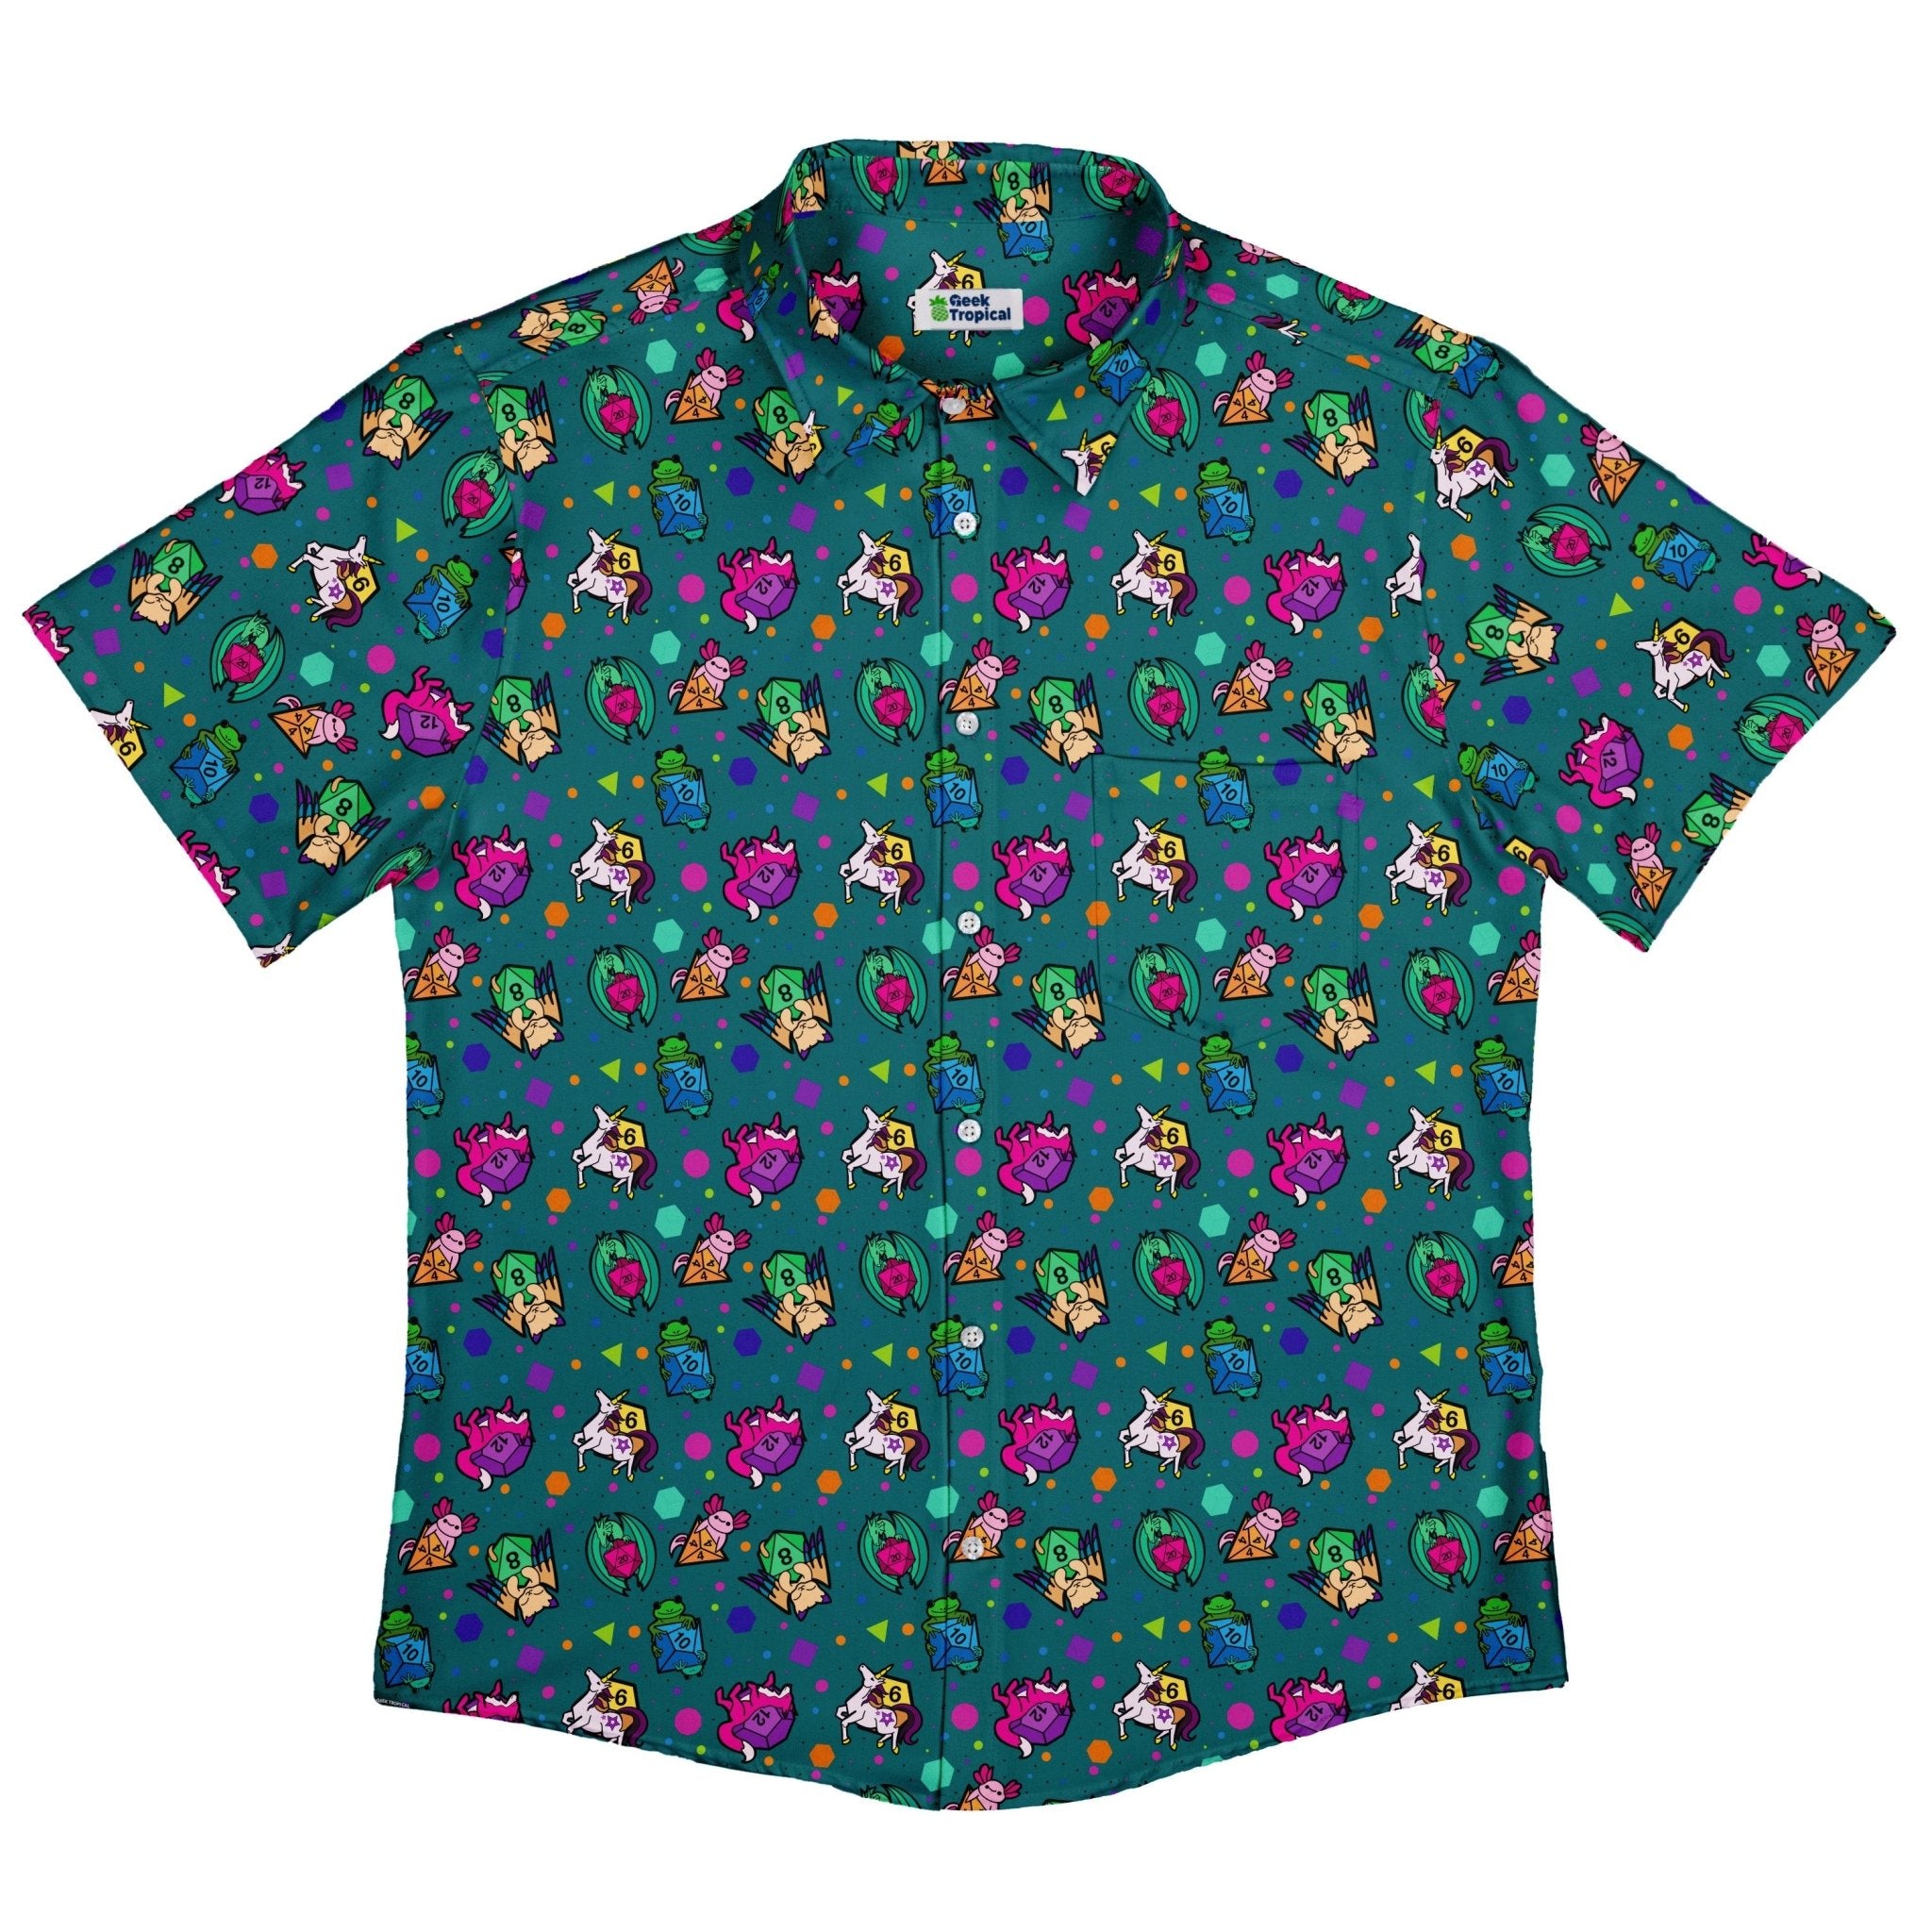 Dnd Dice Critters Teal Button Up Shirt - adult sizing - Animal Patterns - Designed by Rose Khan